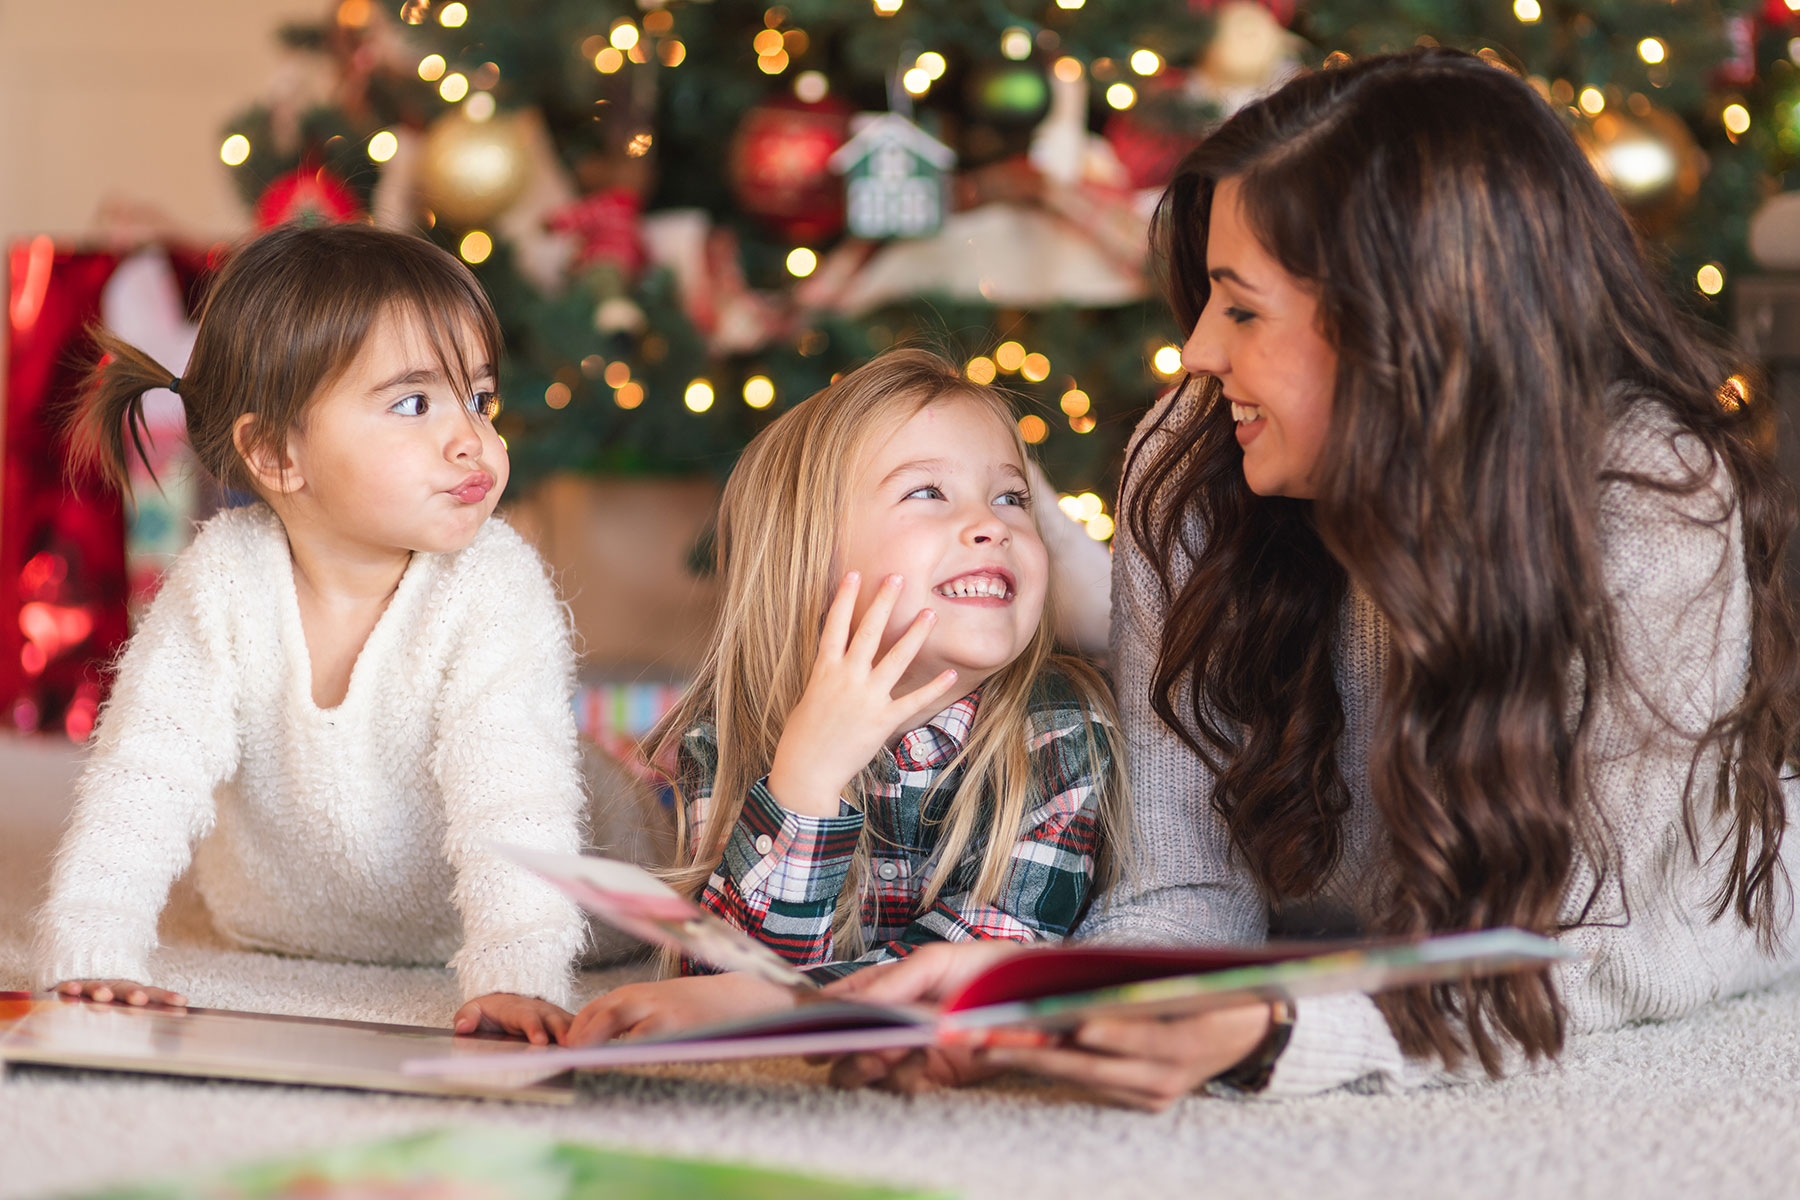 A photo of a mother laying on the floor with her two daughters and reading to them with a Christmas tree in the background. The two girls are looking at their mother who is smiling back at them